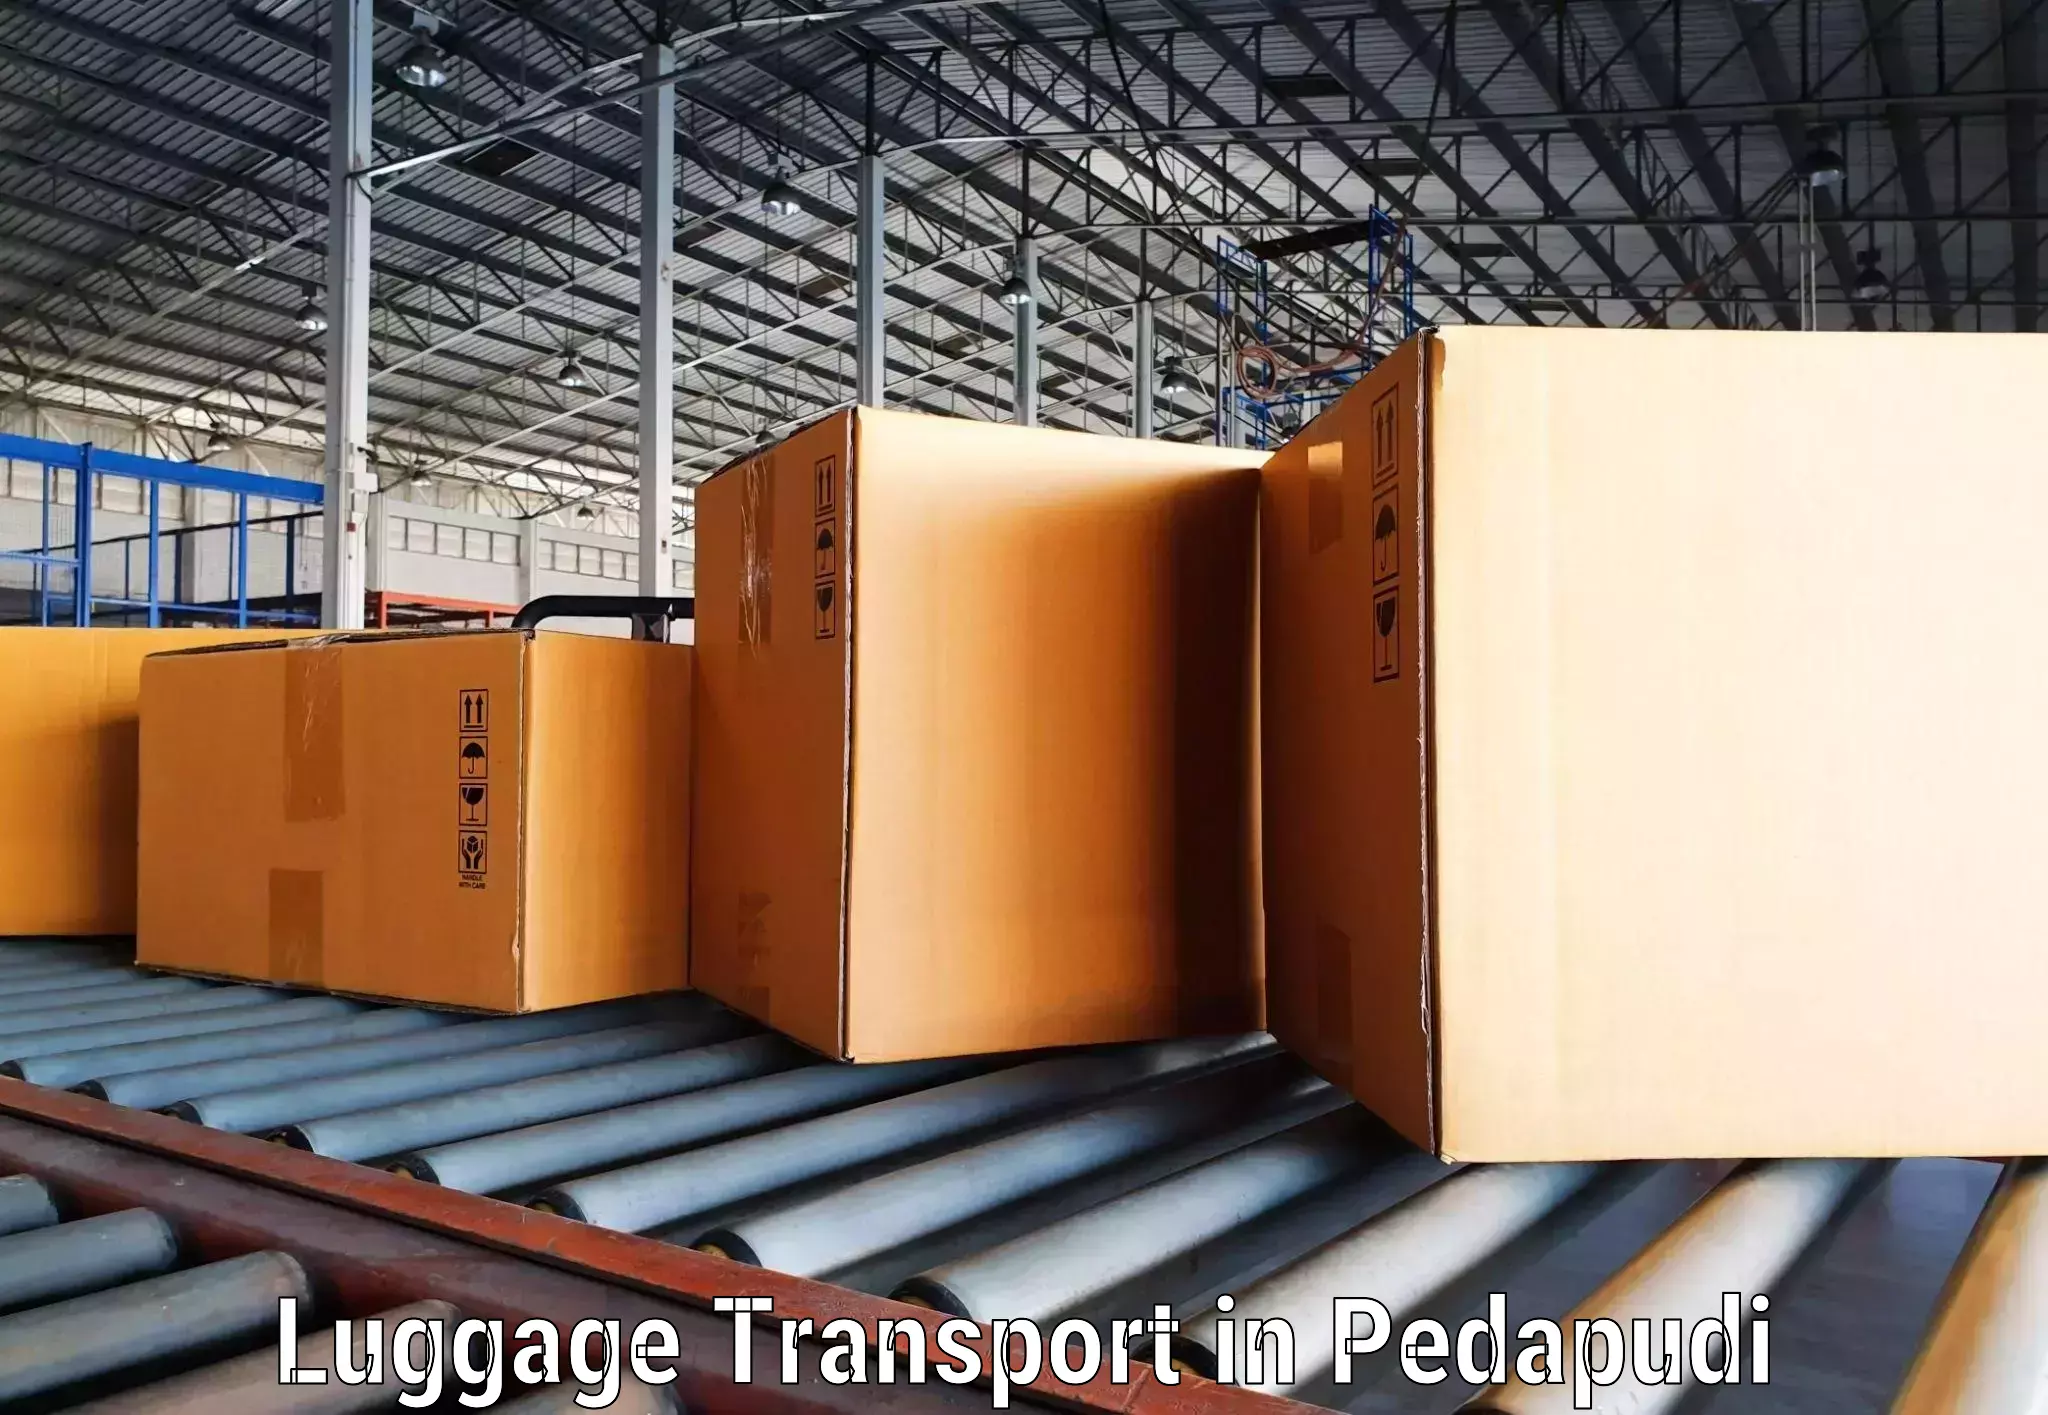 Luggage transport rates in Pedapudi